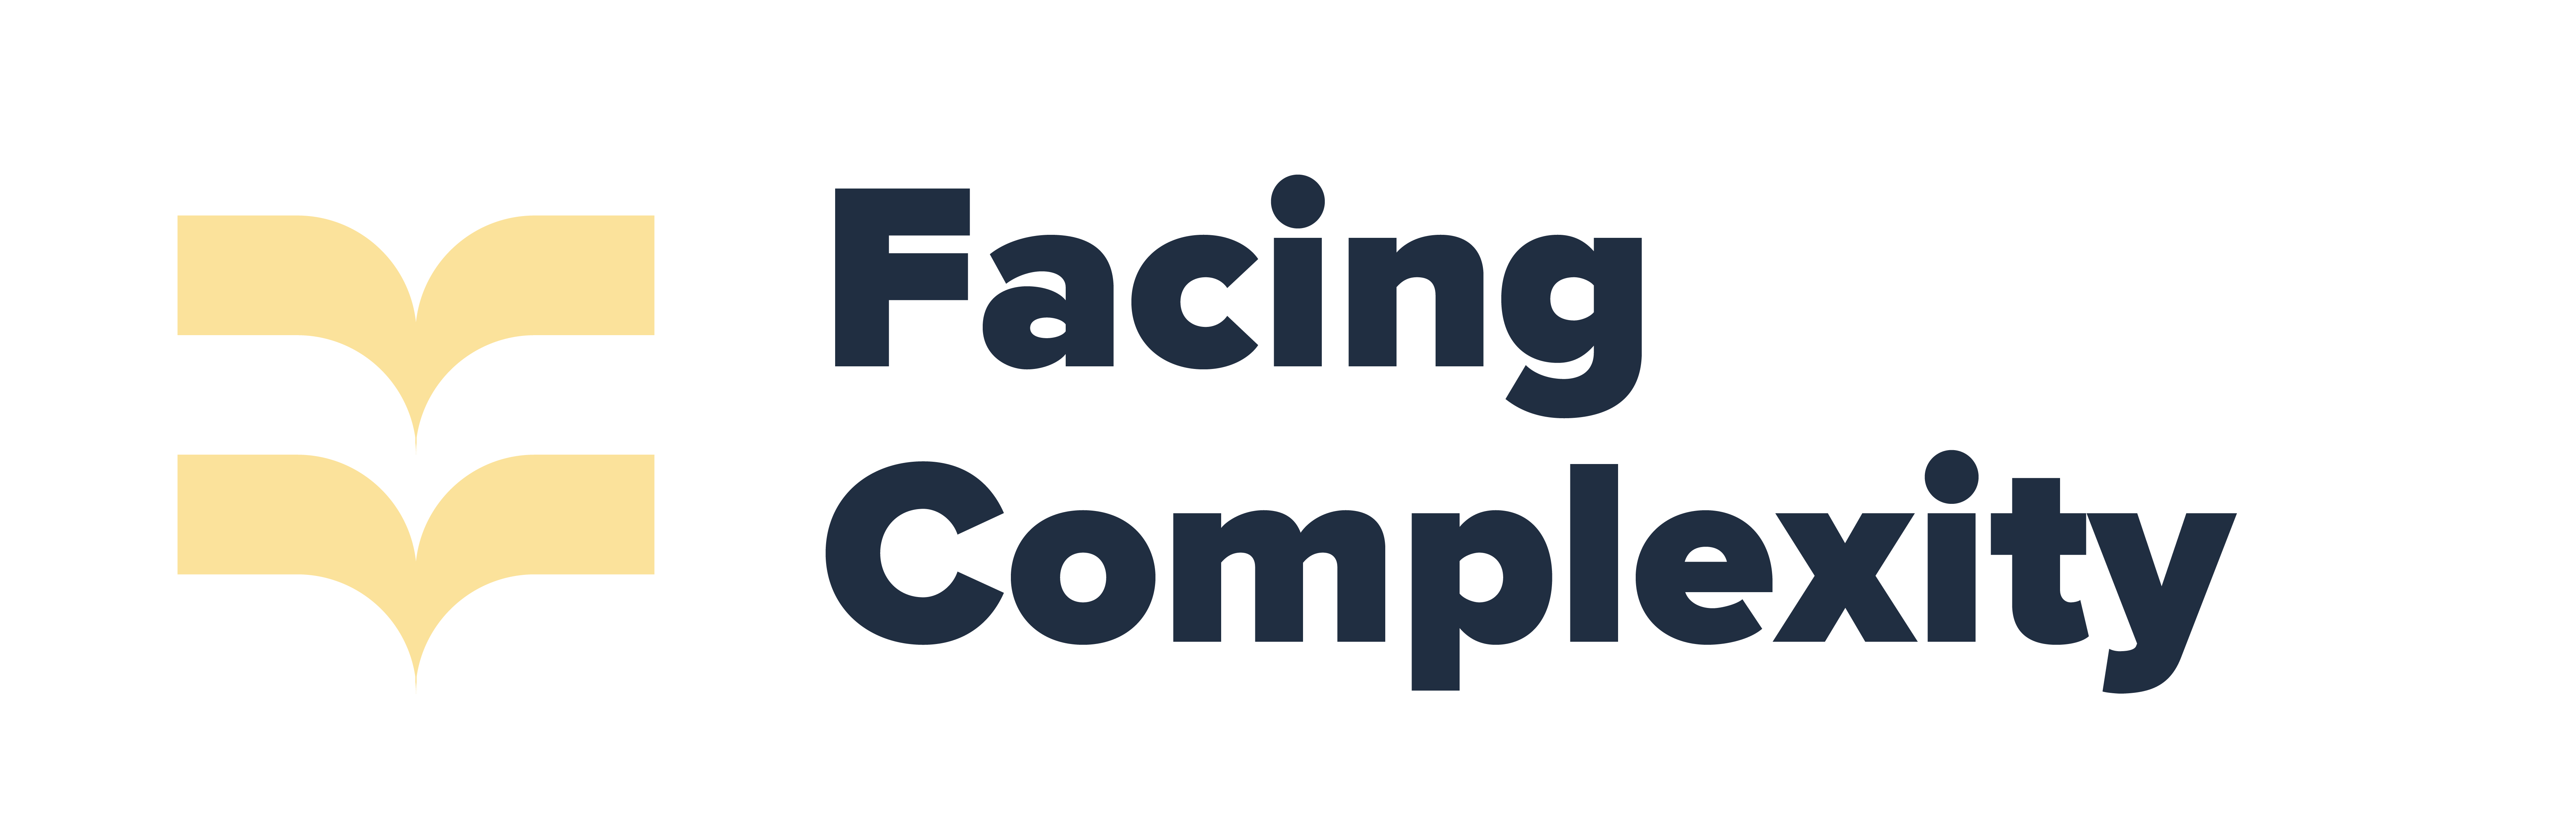 Facing Complexity